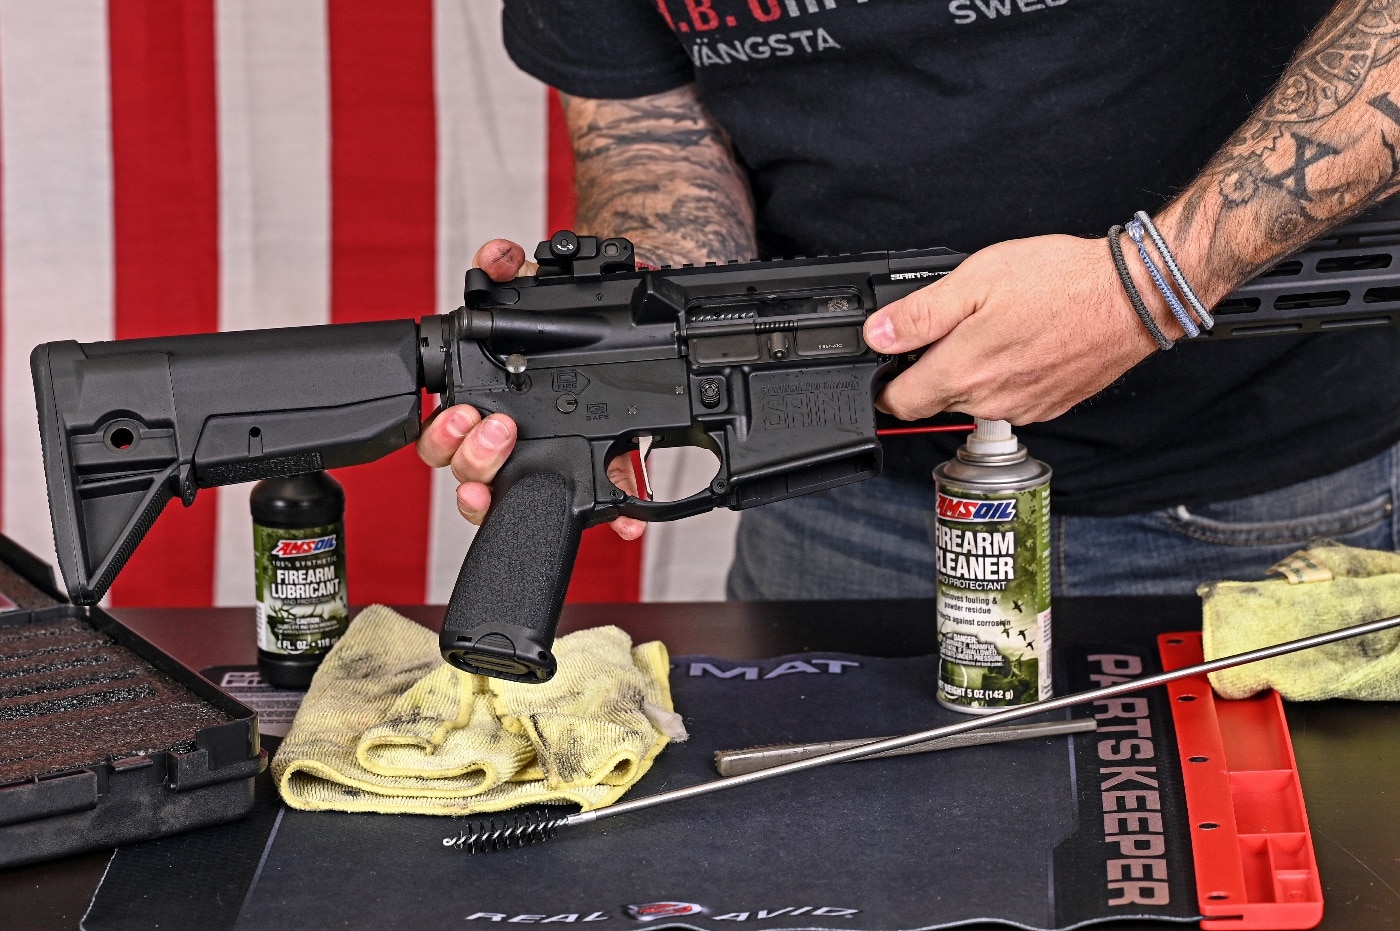 In this photo, we see the author begin the process of cleaning his semi-automatic rifle. A semi-automatic rifle is an autoloading rifle that fires a single cartridge with each pull of the trigger and uses part of the fired cartridge's energy to eject the case and load another cartridge into the chamber.